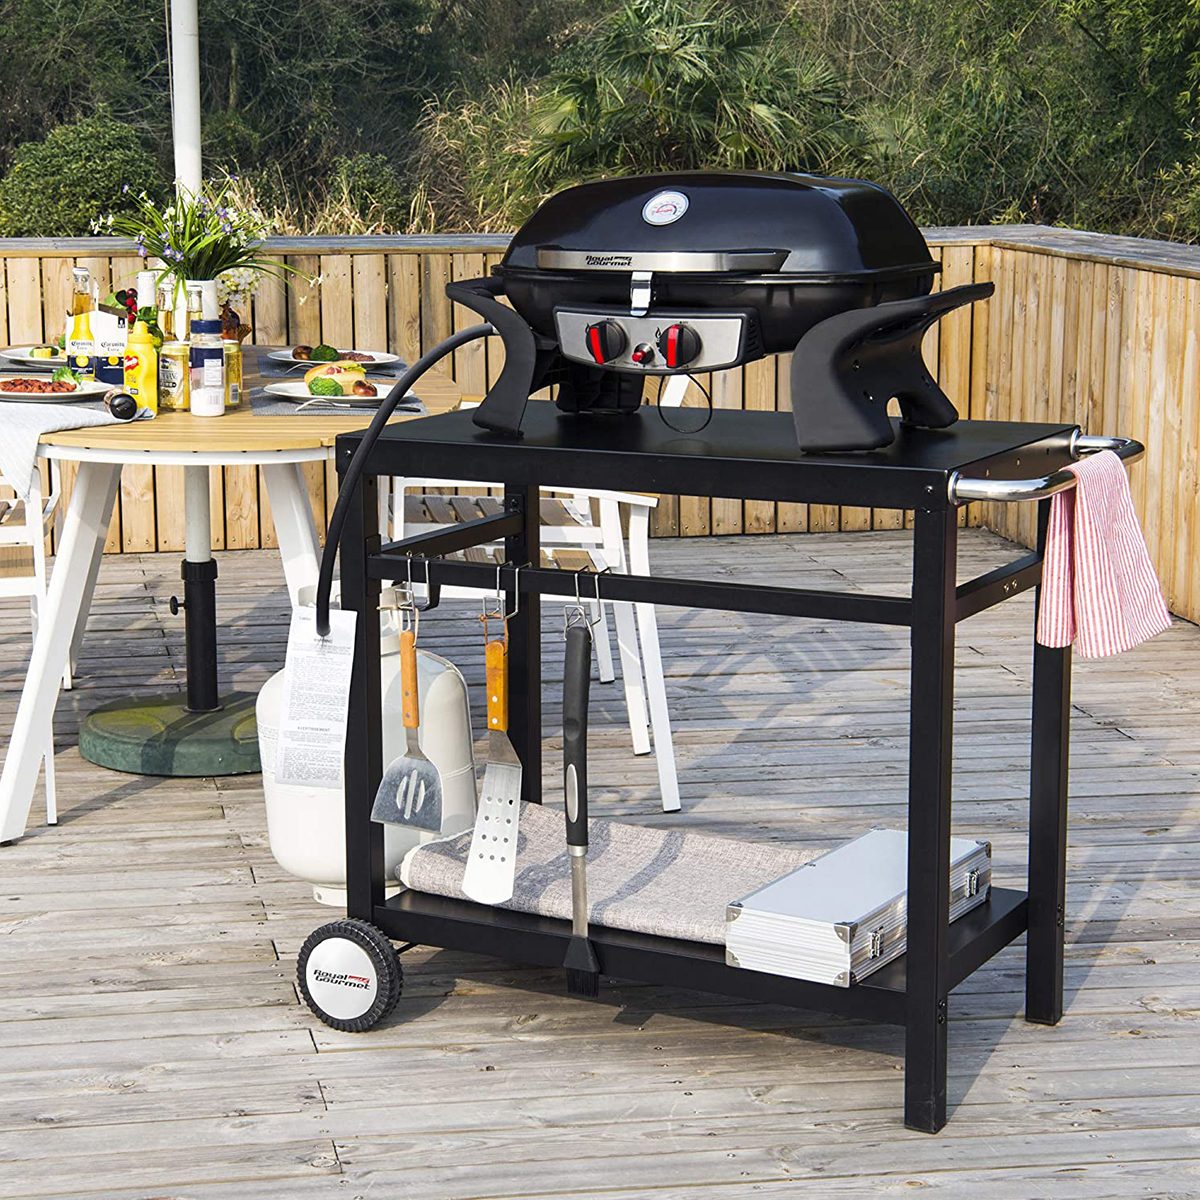 https://www.familyhandyman.com/wp-content/uploads/2023/04/The-7-Best-Grill-Tables-and-Carts-for-the-Ultimate-Outdoor-Cooking-Experience_FT_via-amazon.com_.jpg